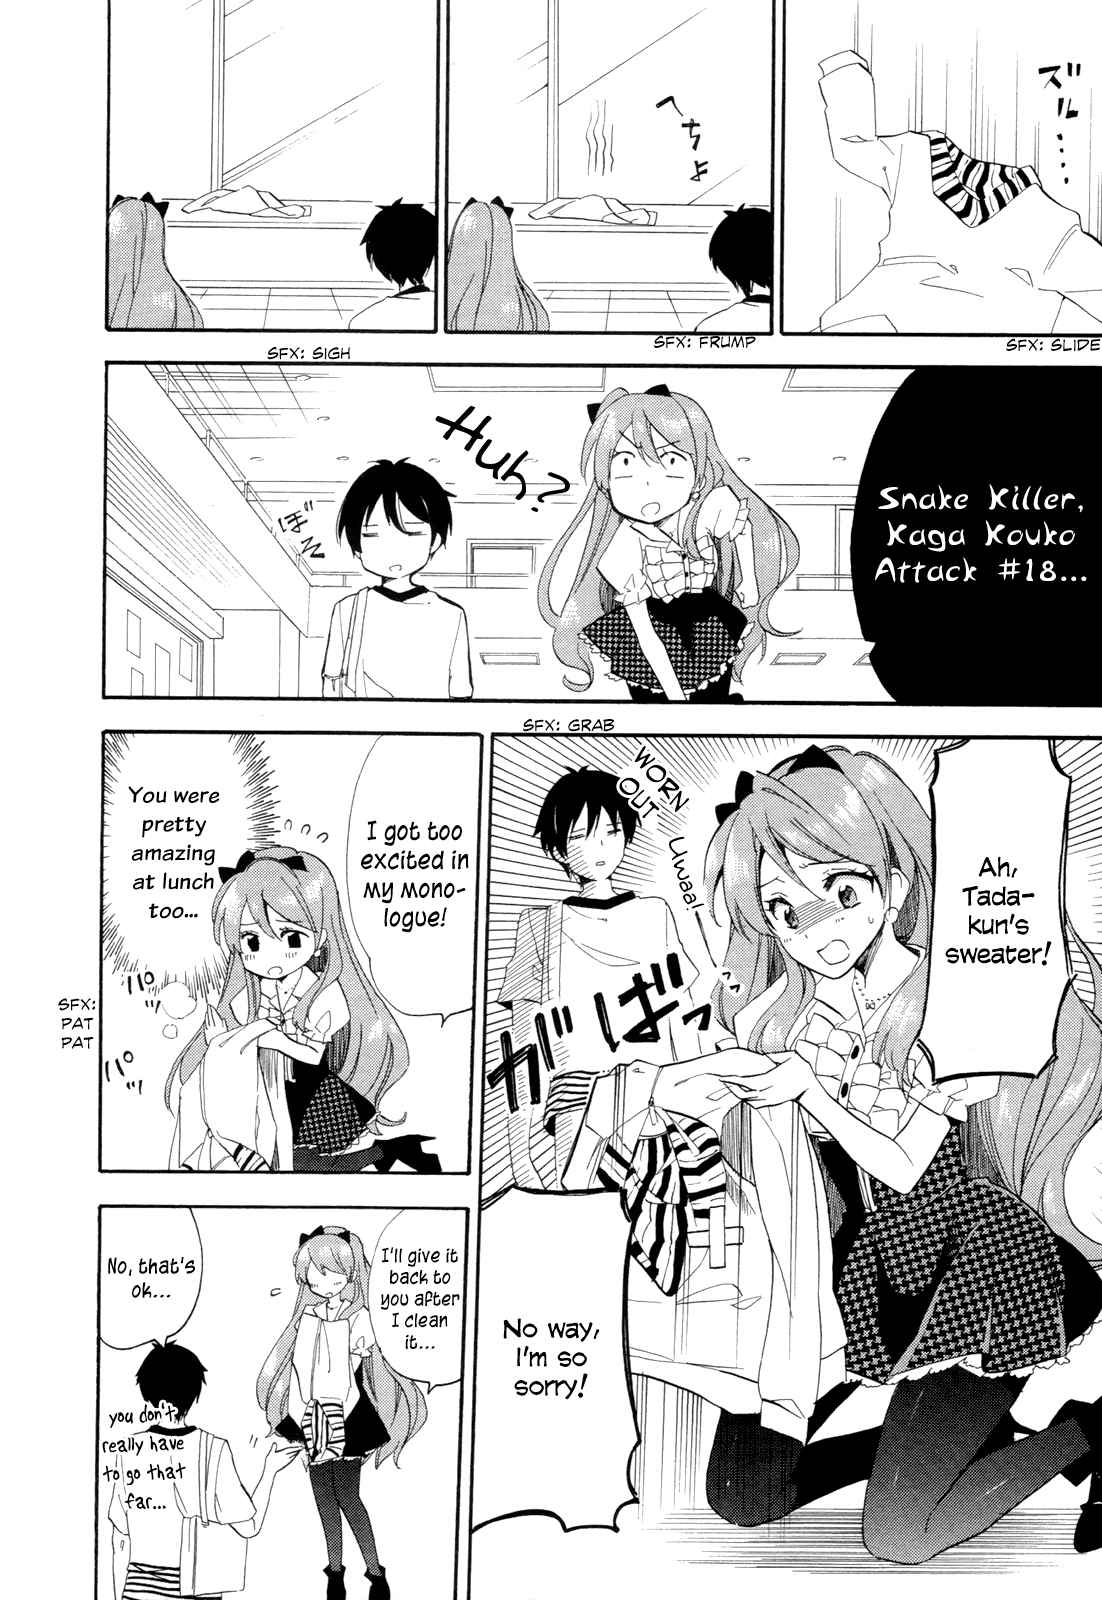 Golden Time Vol. 3 Ch. 15 Things You Really Don't Like